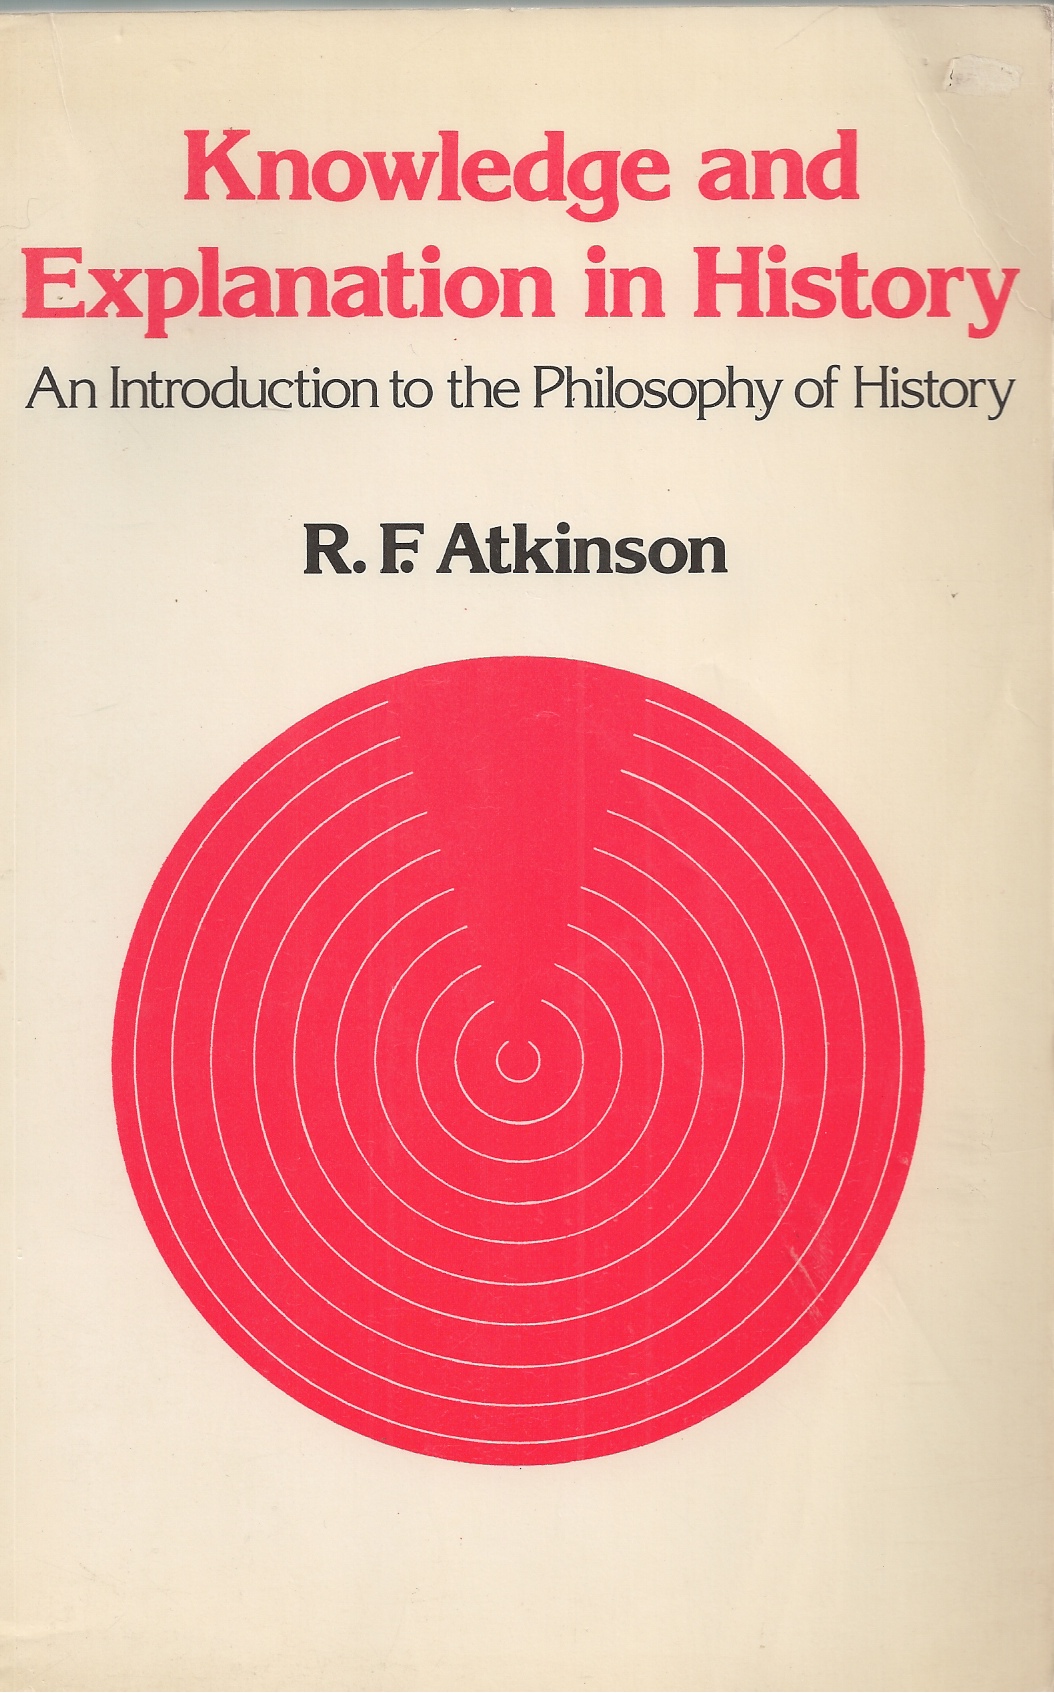 ATKINSON, R. F. - Knowledge and Explanation in History an Introduction to the Philosophy of History